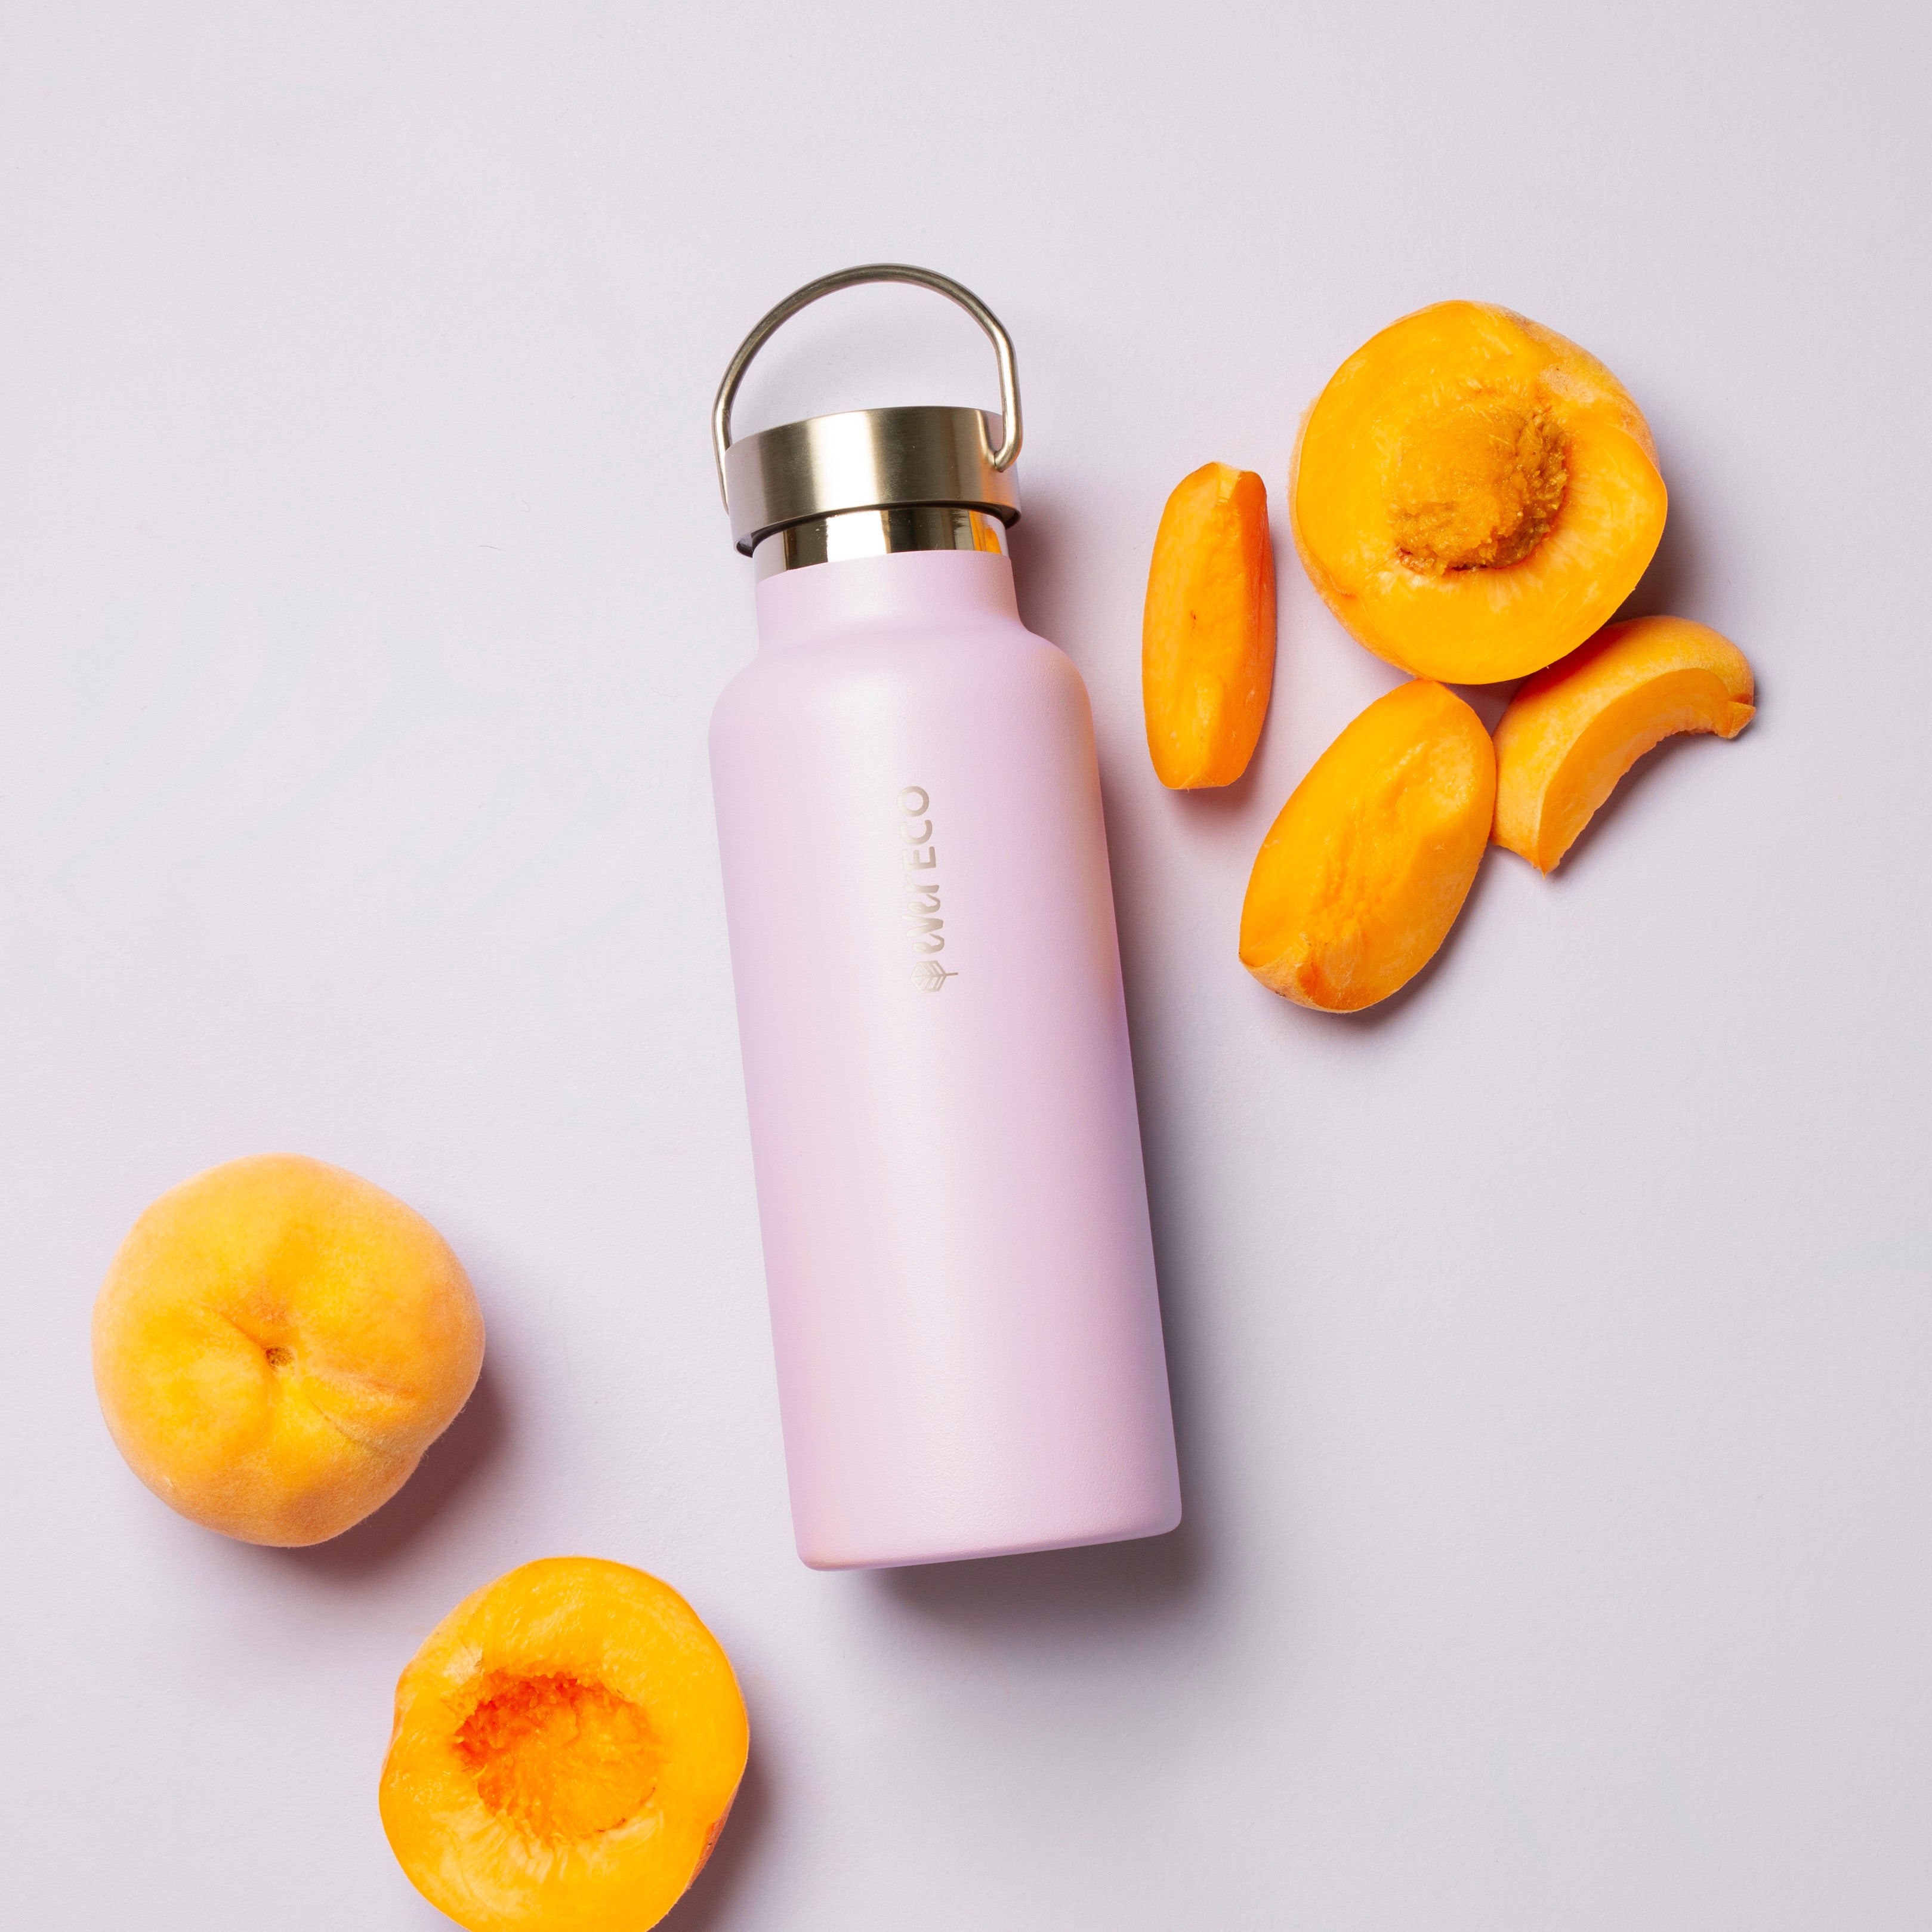 Ever Eco Insulated Drink Bottle Byron Bay - 500ml